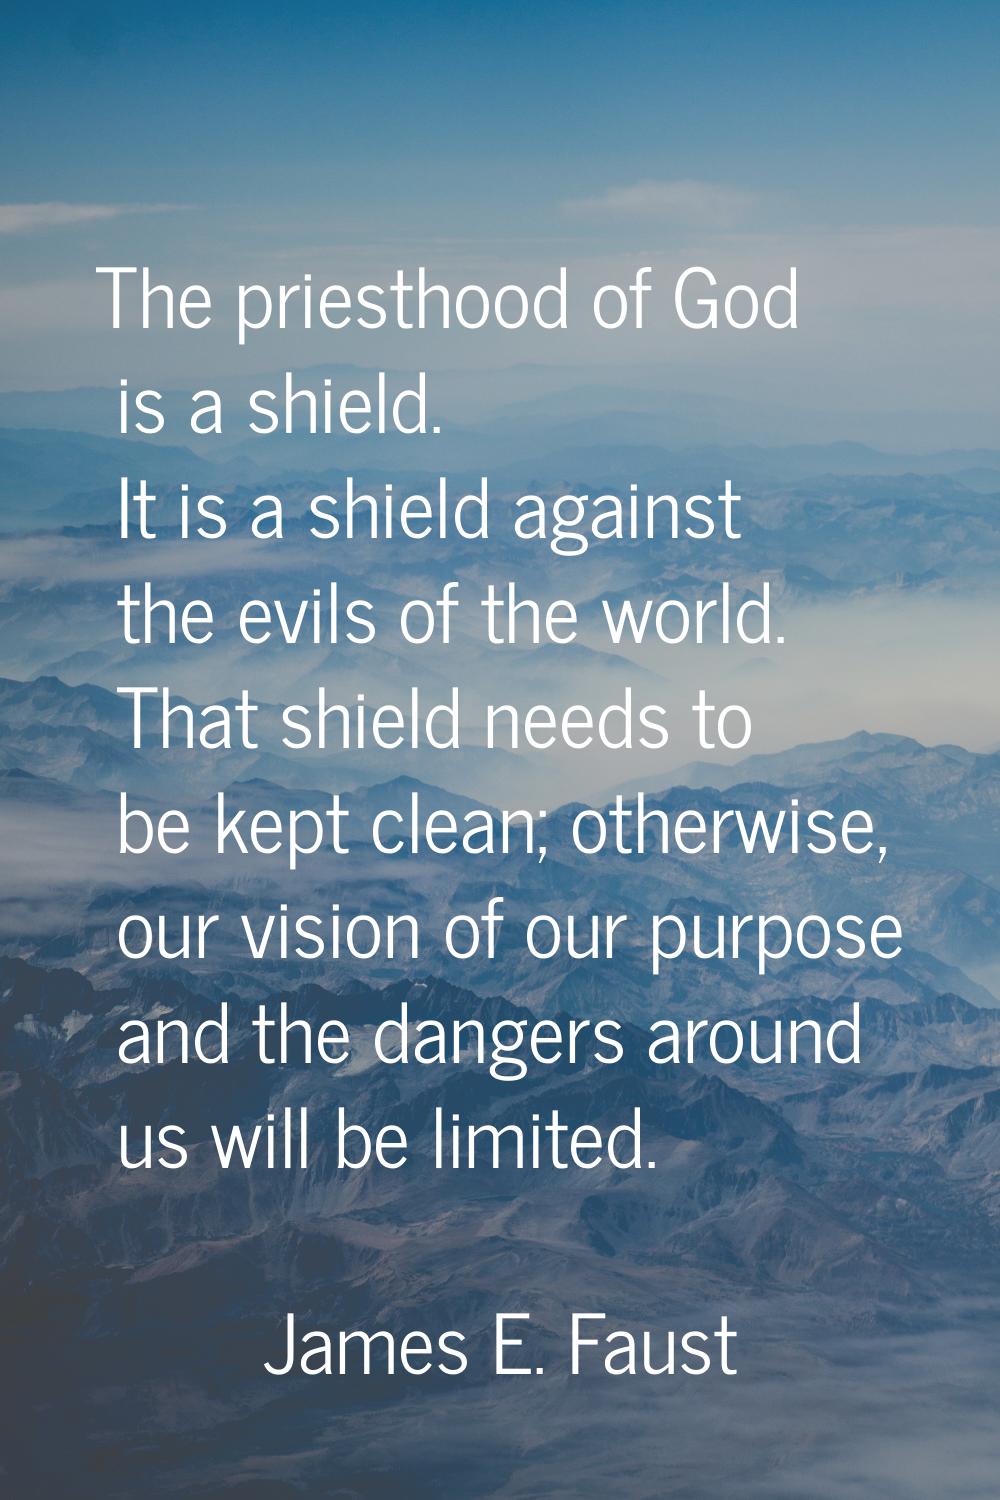 The priesthood of God is a shield. It is a shield against the evils of the world. That shield needs